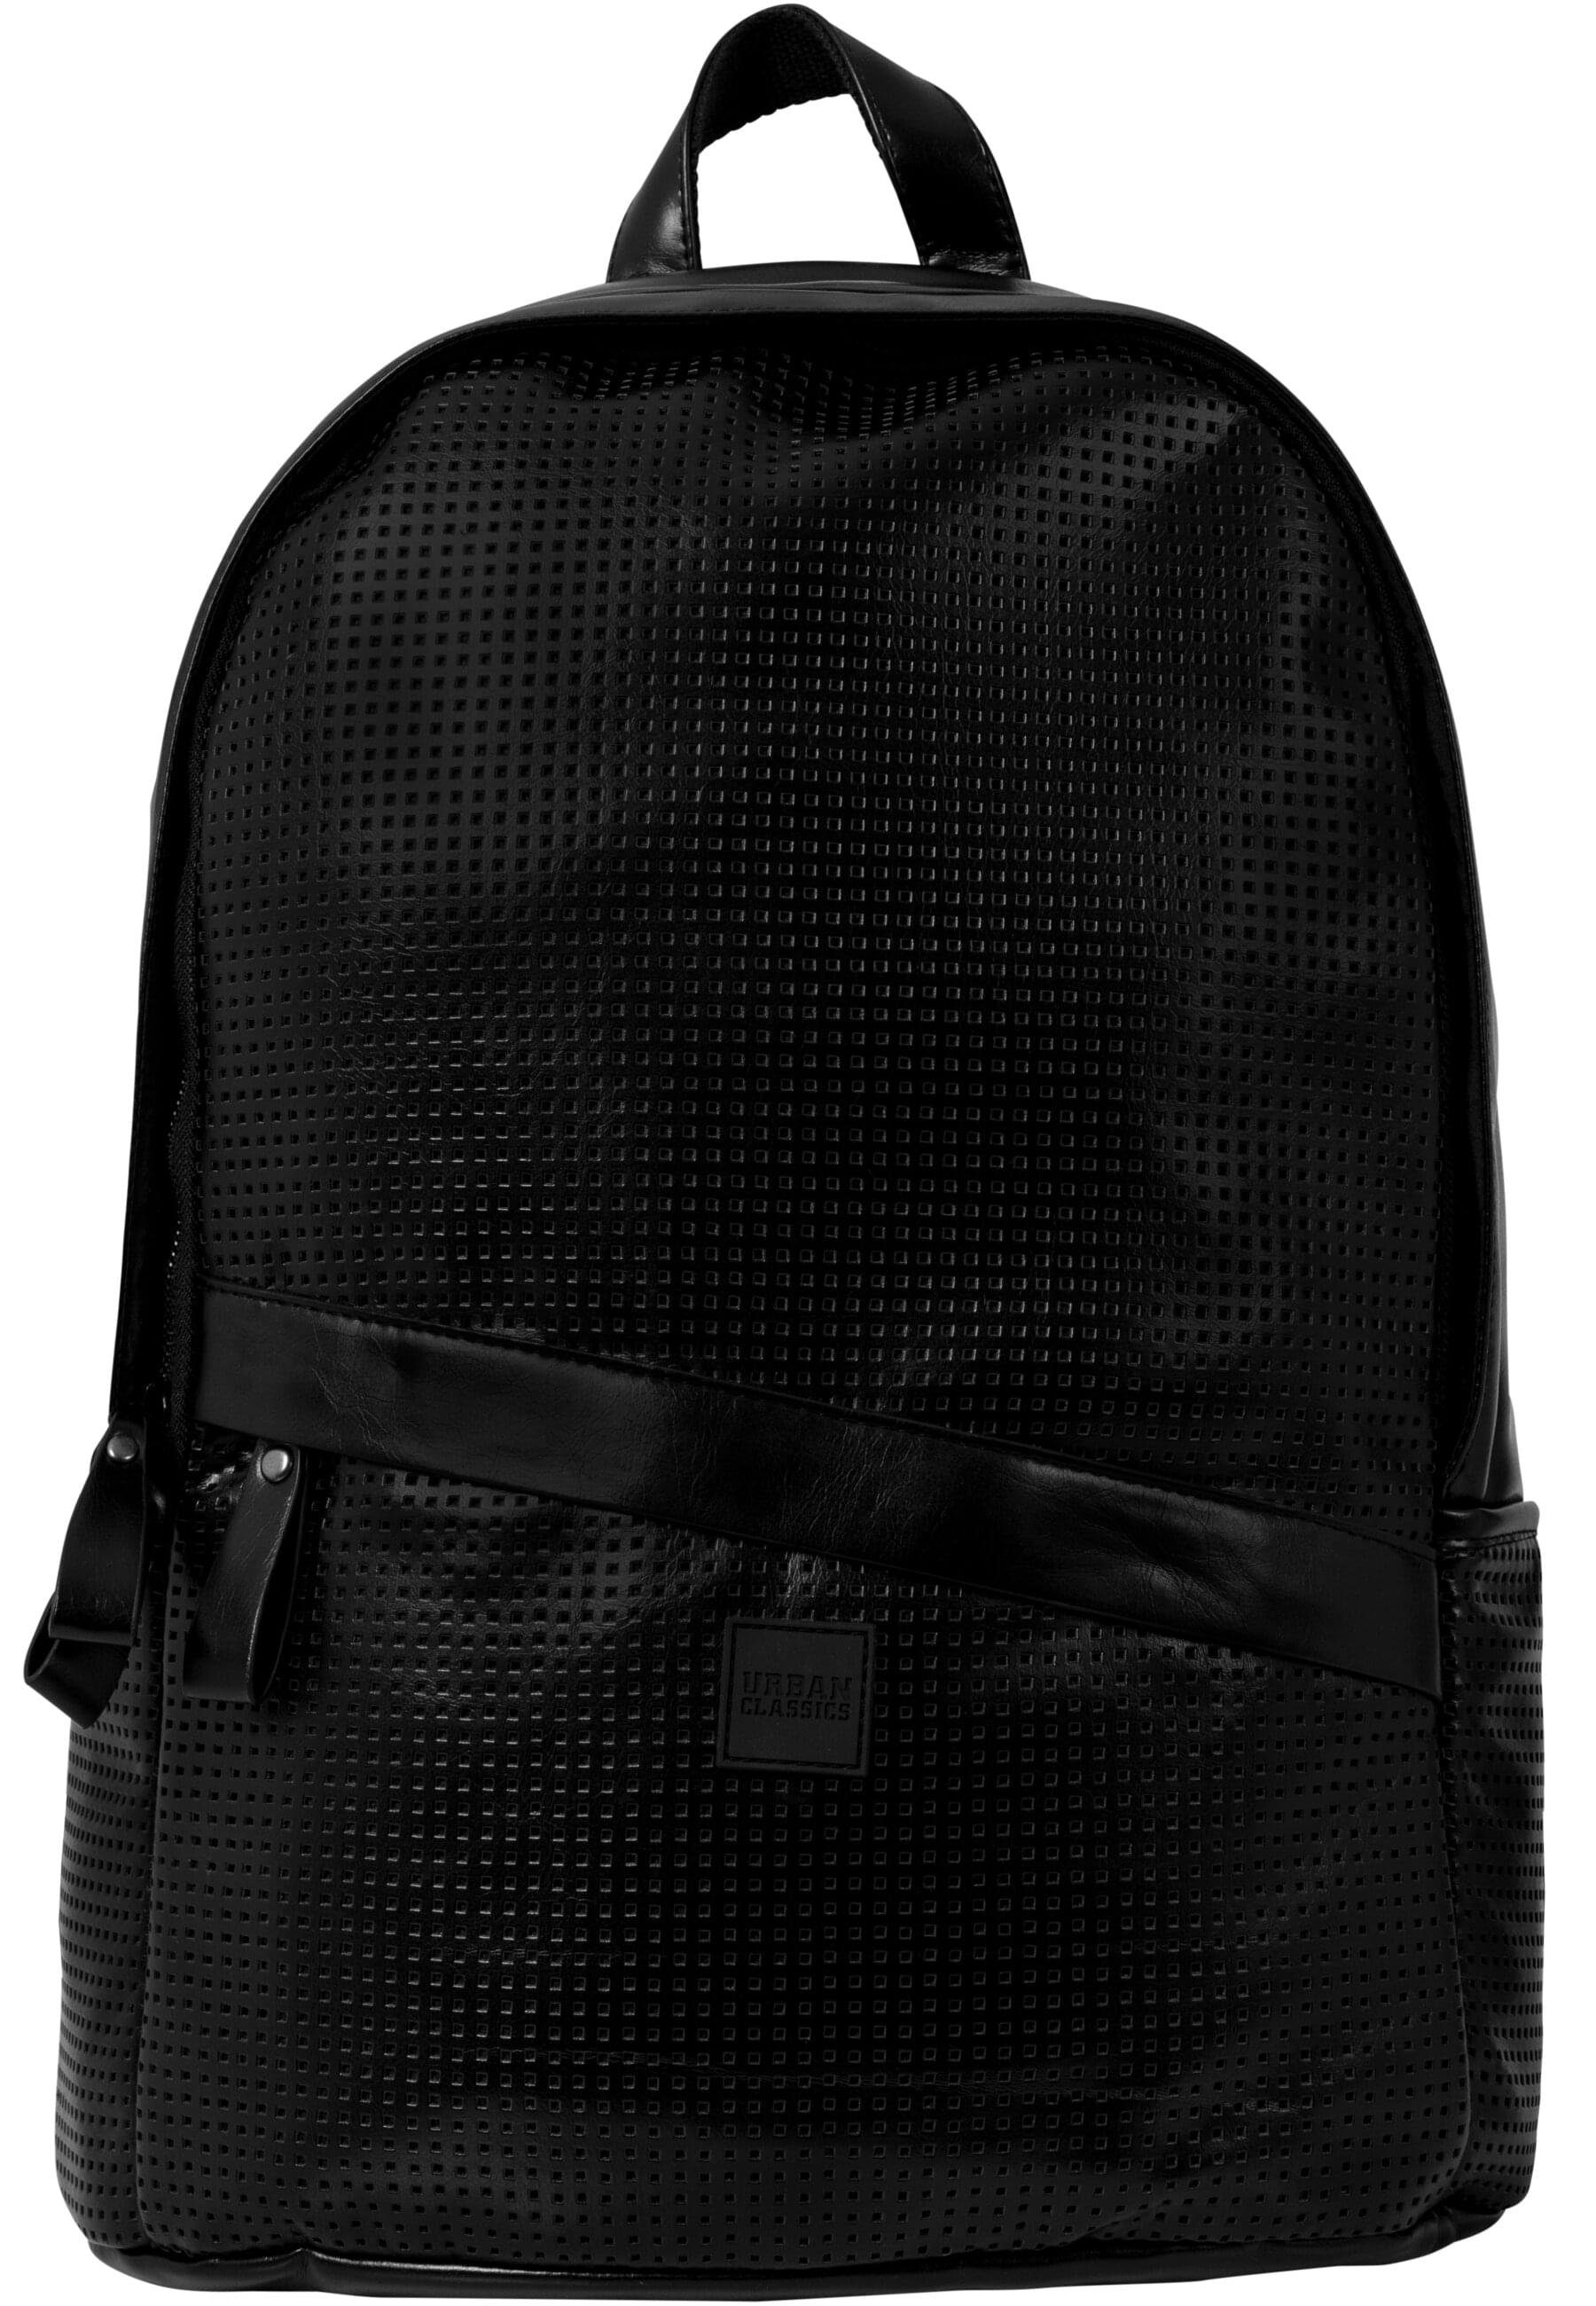 URBAN CLASSICS Rucksack Unisex Perforated Backpack Leather Synthetic